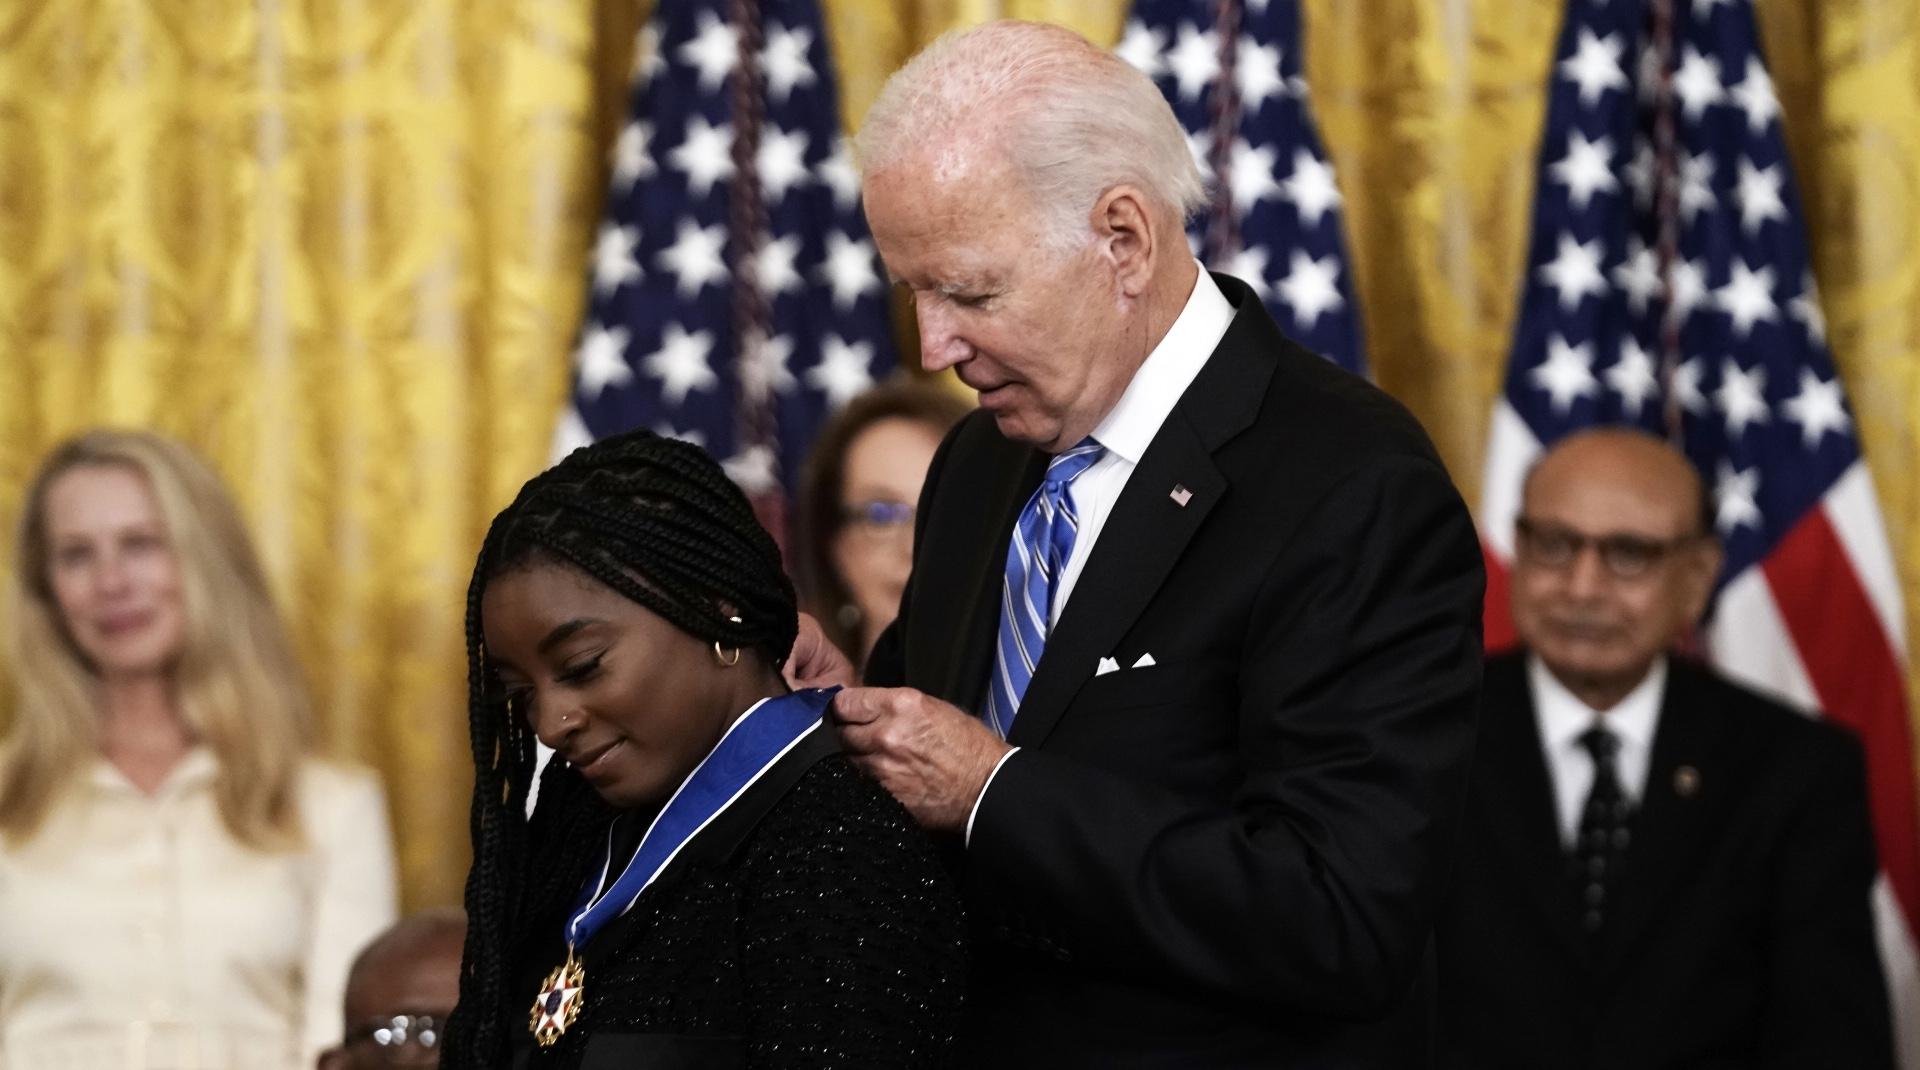 The United States highest civilian honour has been bestowed upon gymnast Simone Biles.